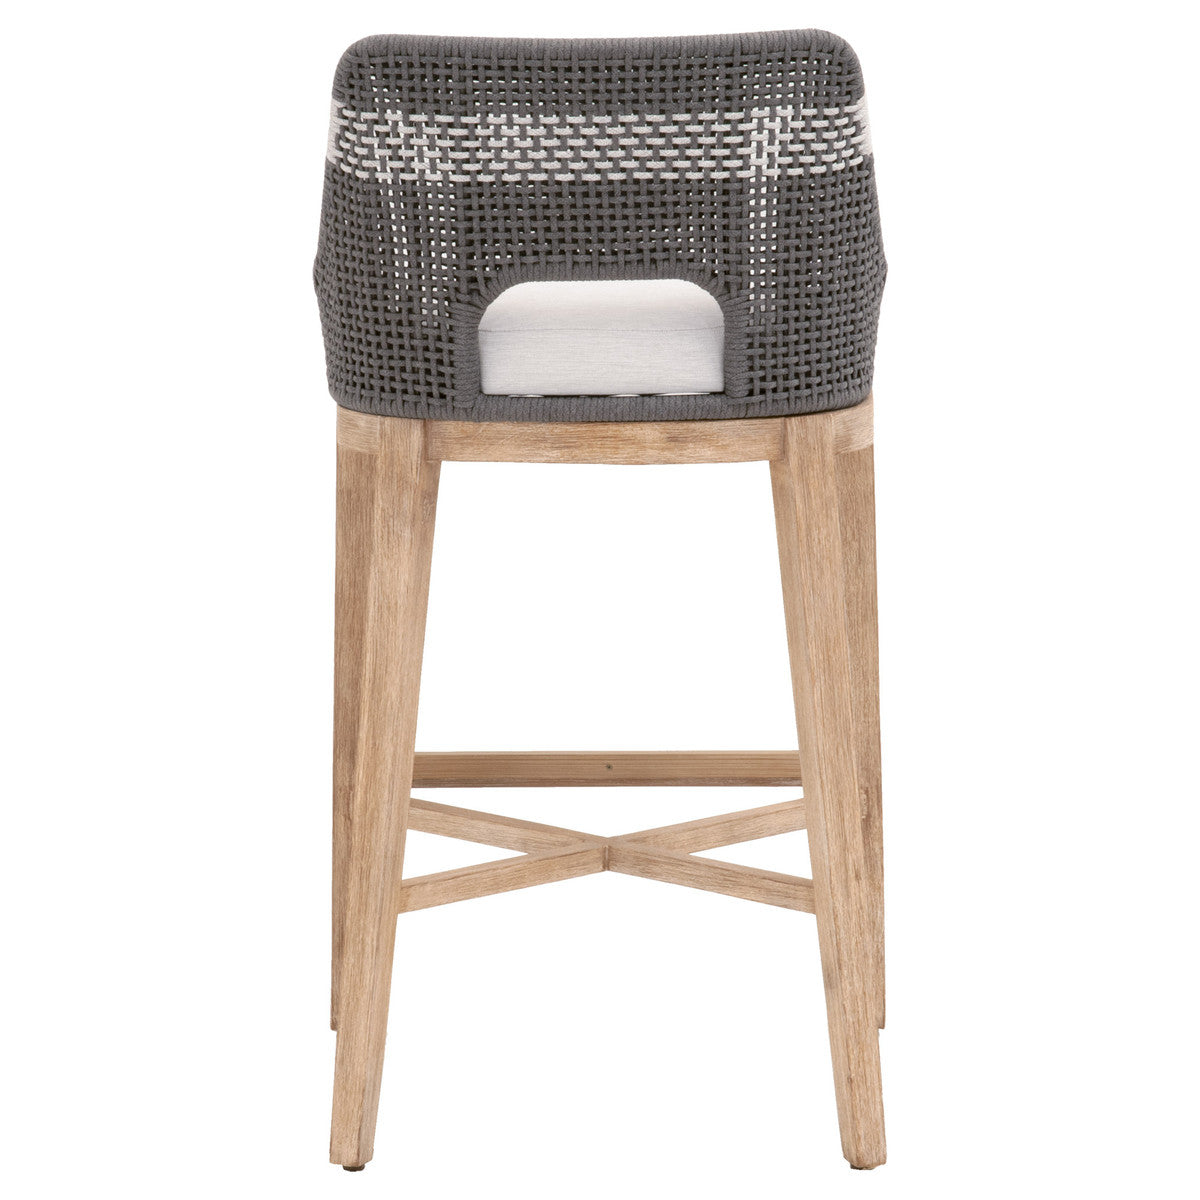 Tapestry Barstool in Dove Flat Rope, White Speckle Stripe, Performance White Speckle, Natural Gray Mahogany - 6850BS.DOV/WHT/NG